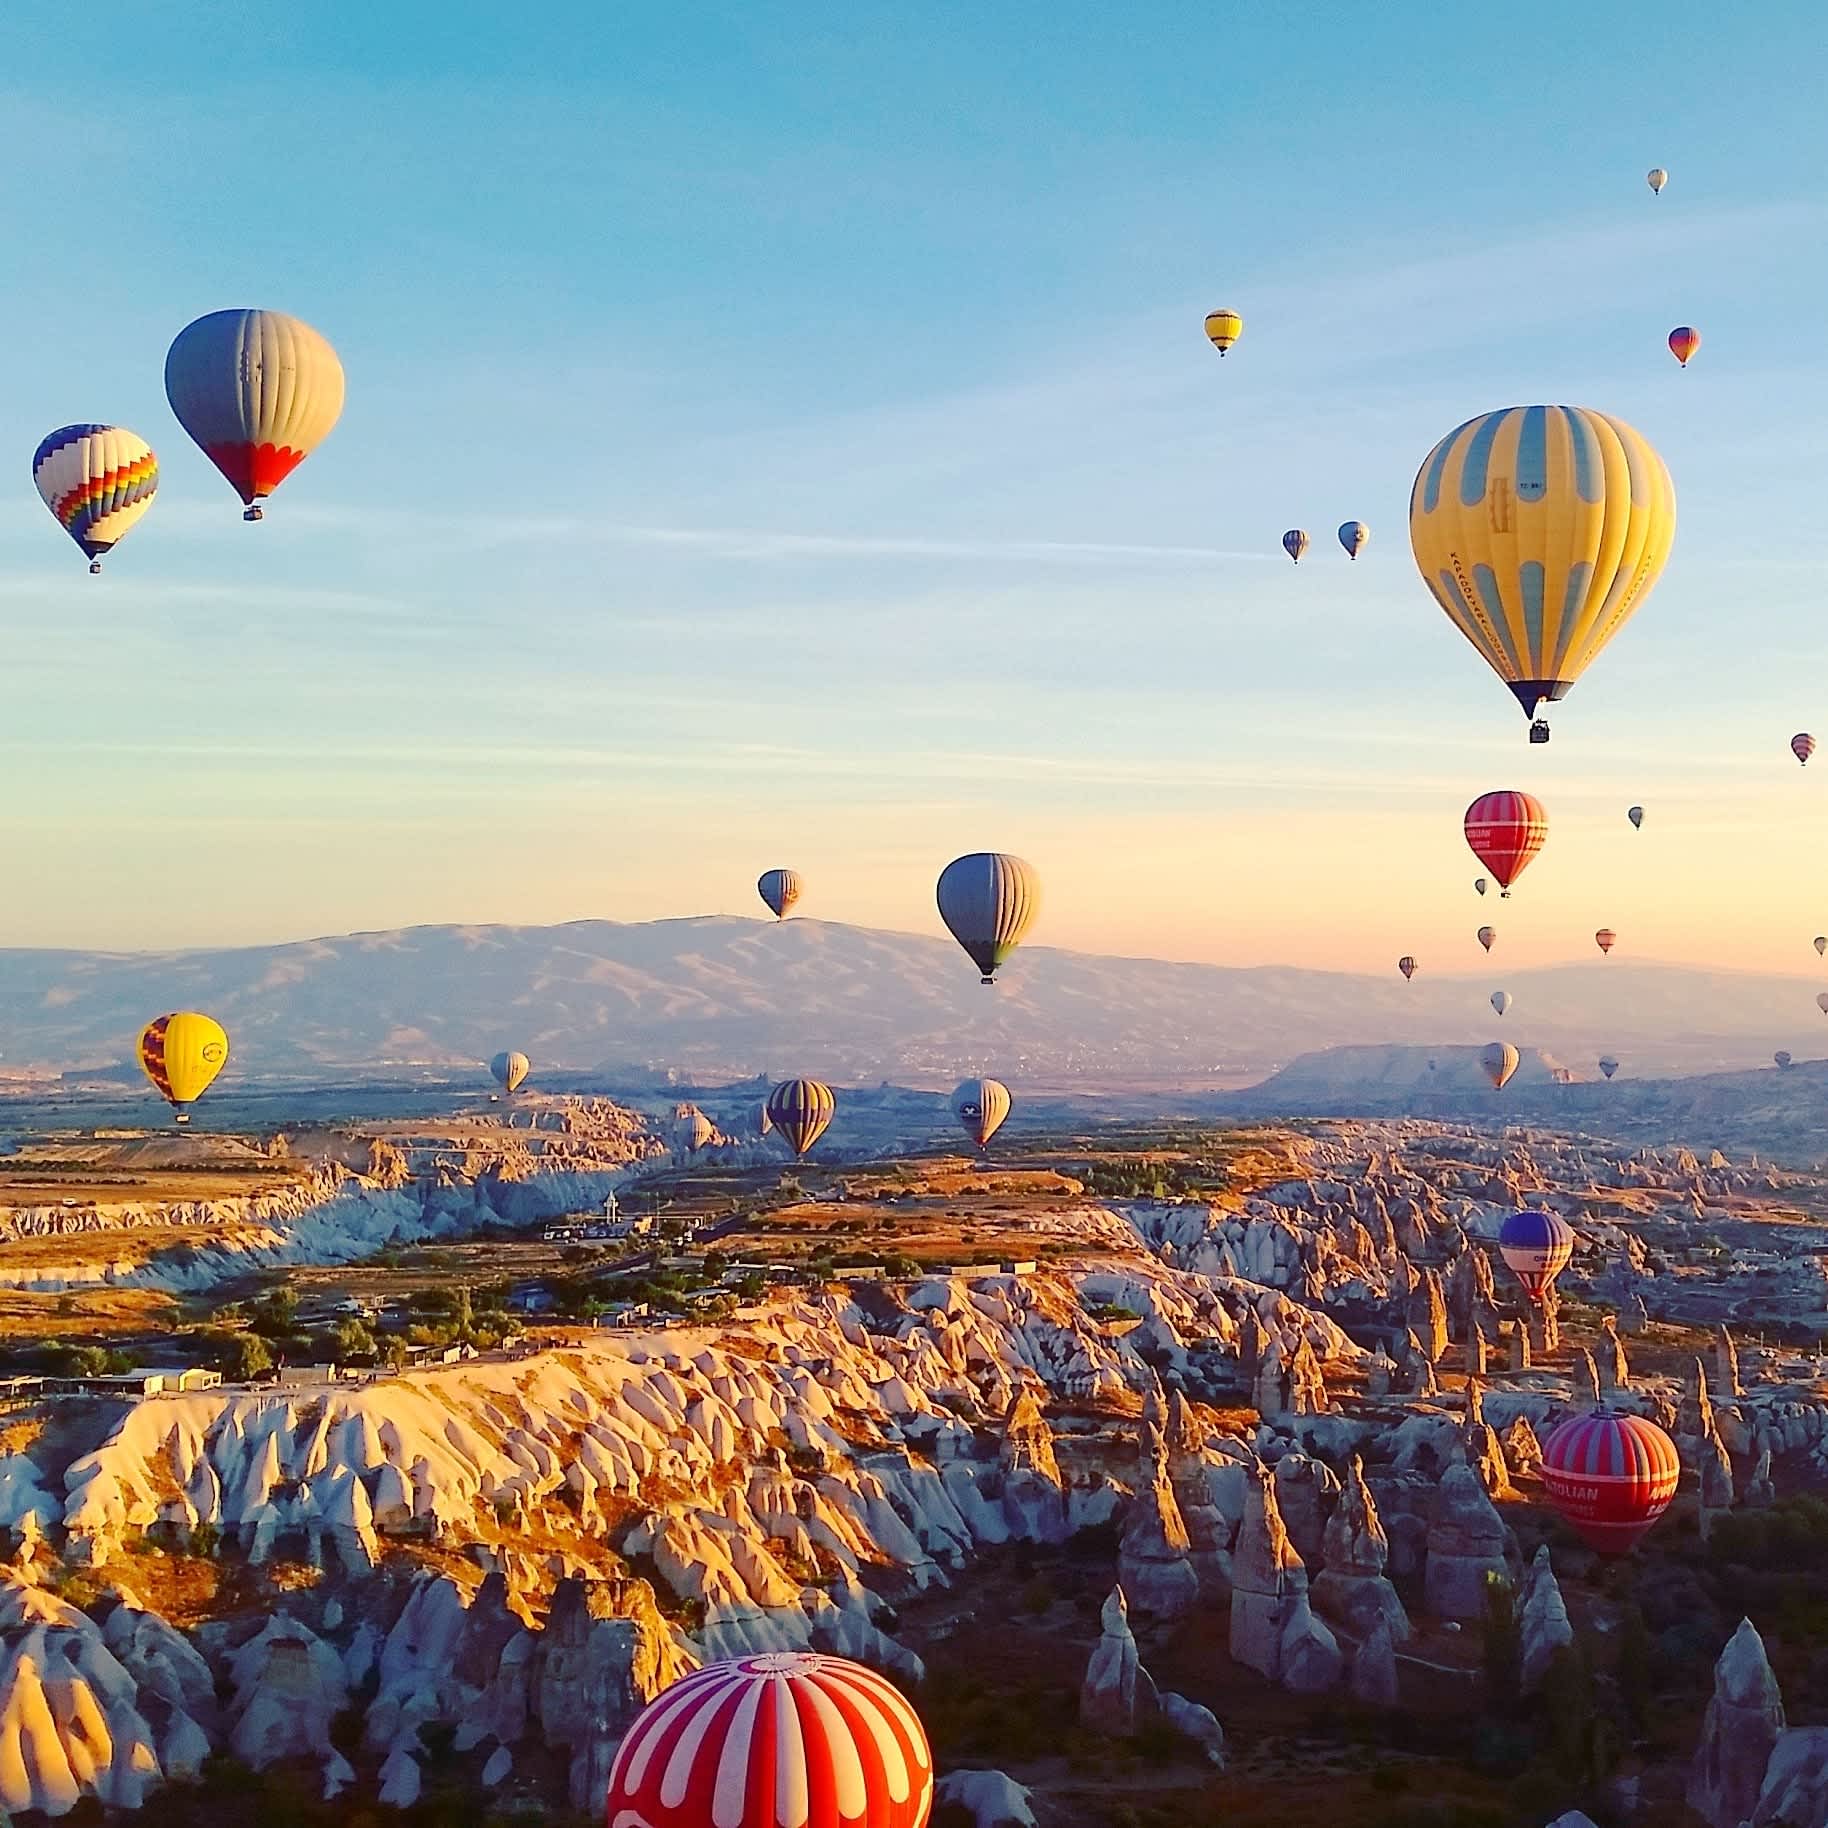 65 travel experiences to have while you're alive and breathing